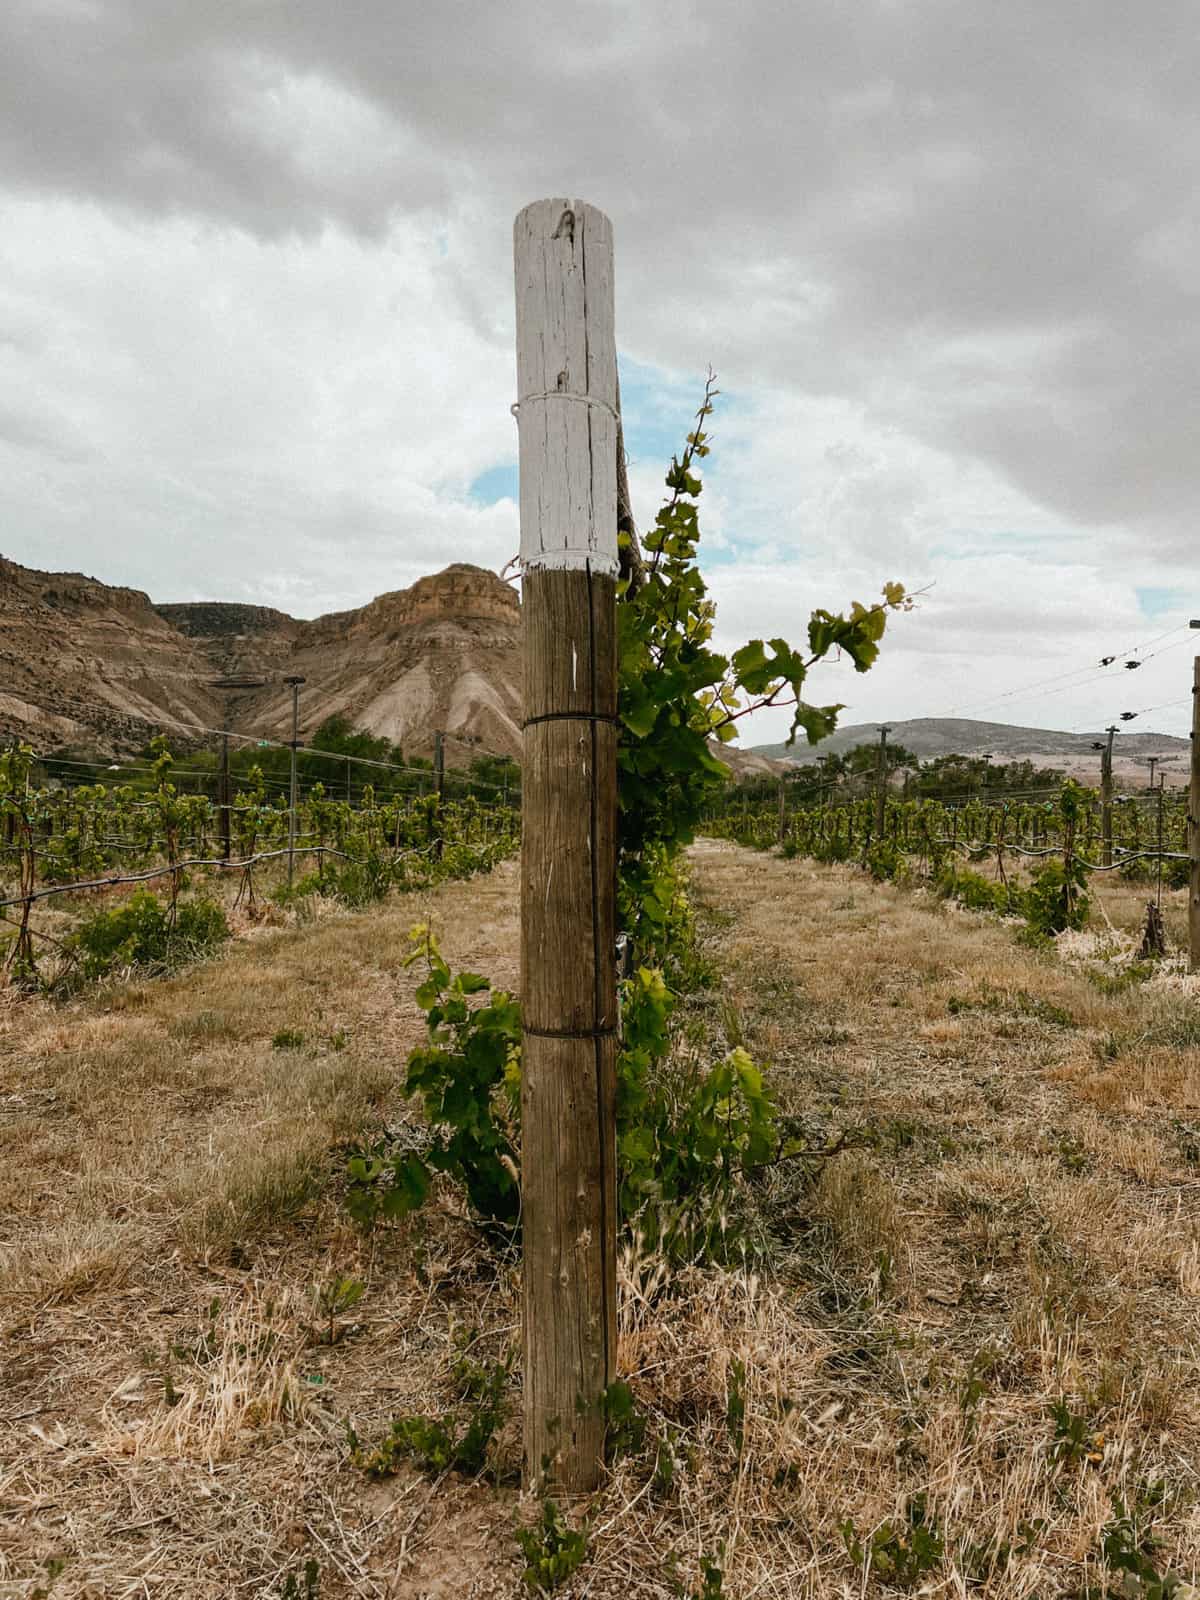 Some of the vines from the local vineyard we stopped at in Palisade.